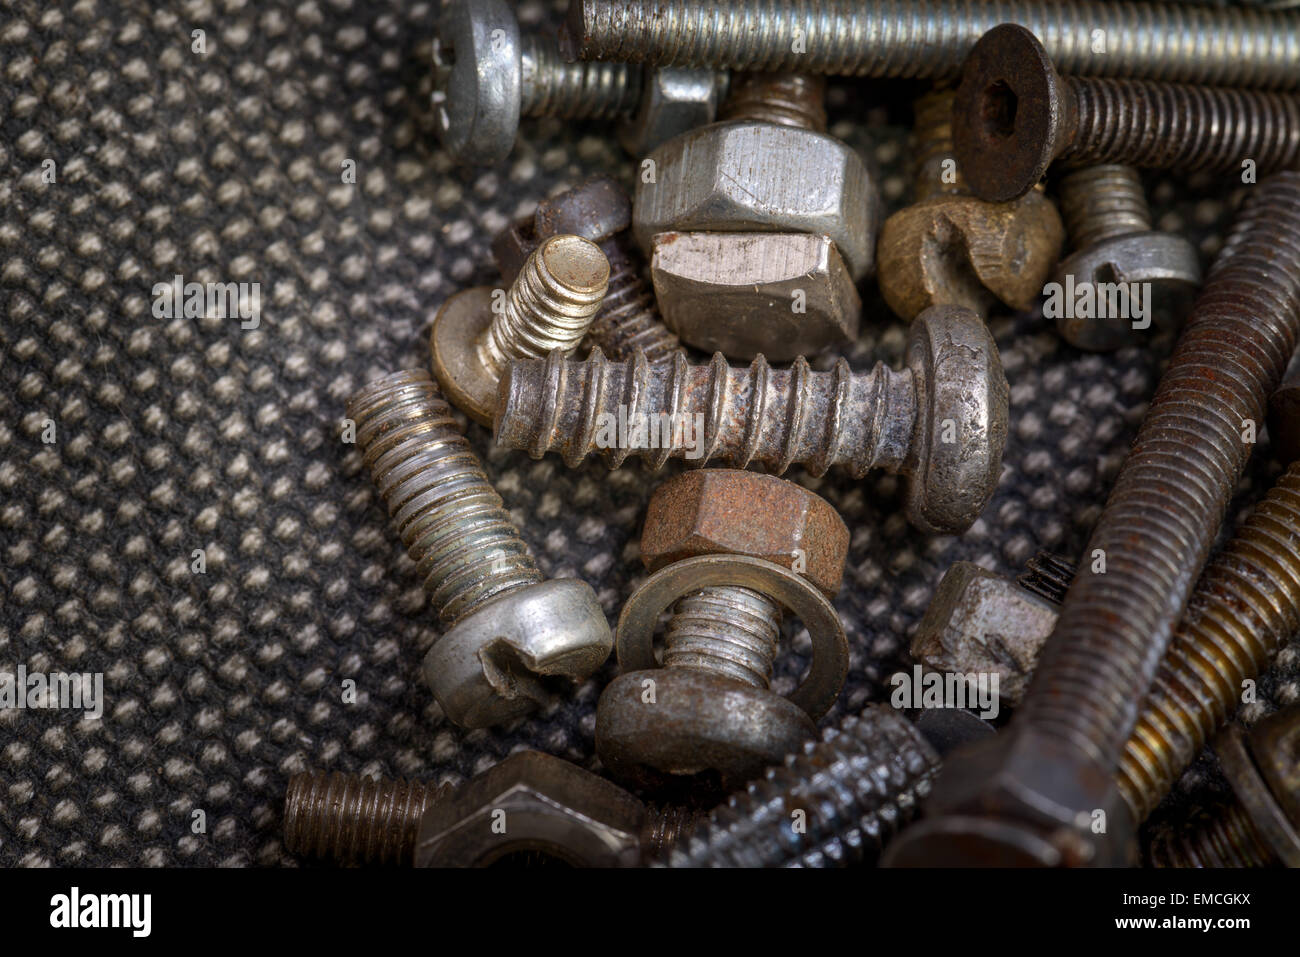 Several old screws on a grey texile background Stock Photo